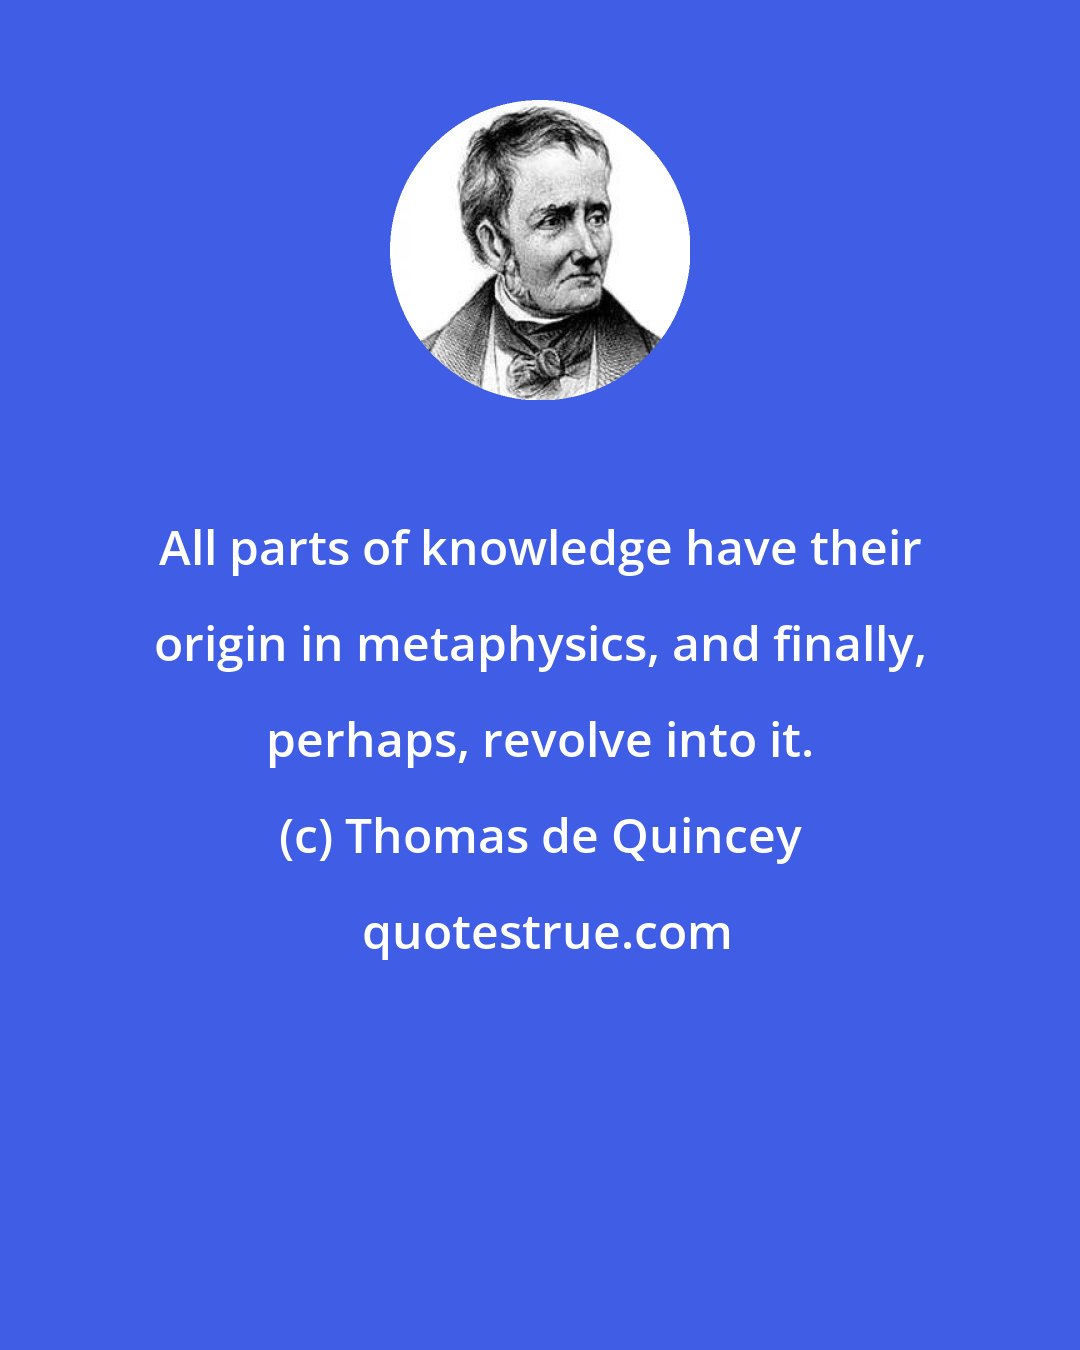 Thomas de Quincey: All parts of knowledge have their origin in metaphysics, and finally, perhaps, revolve into it.